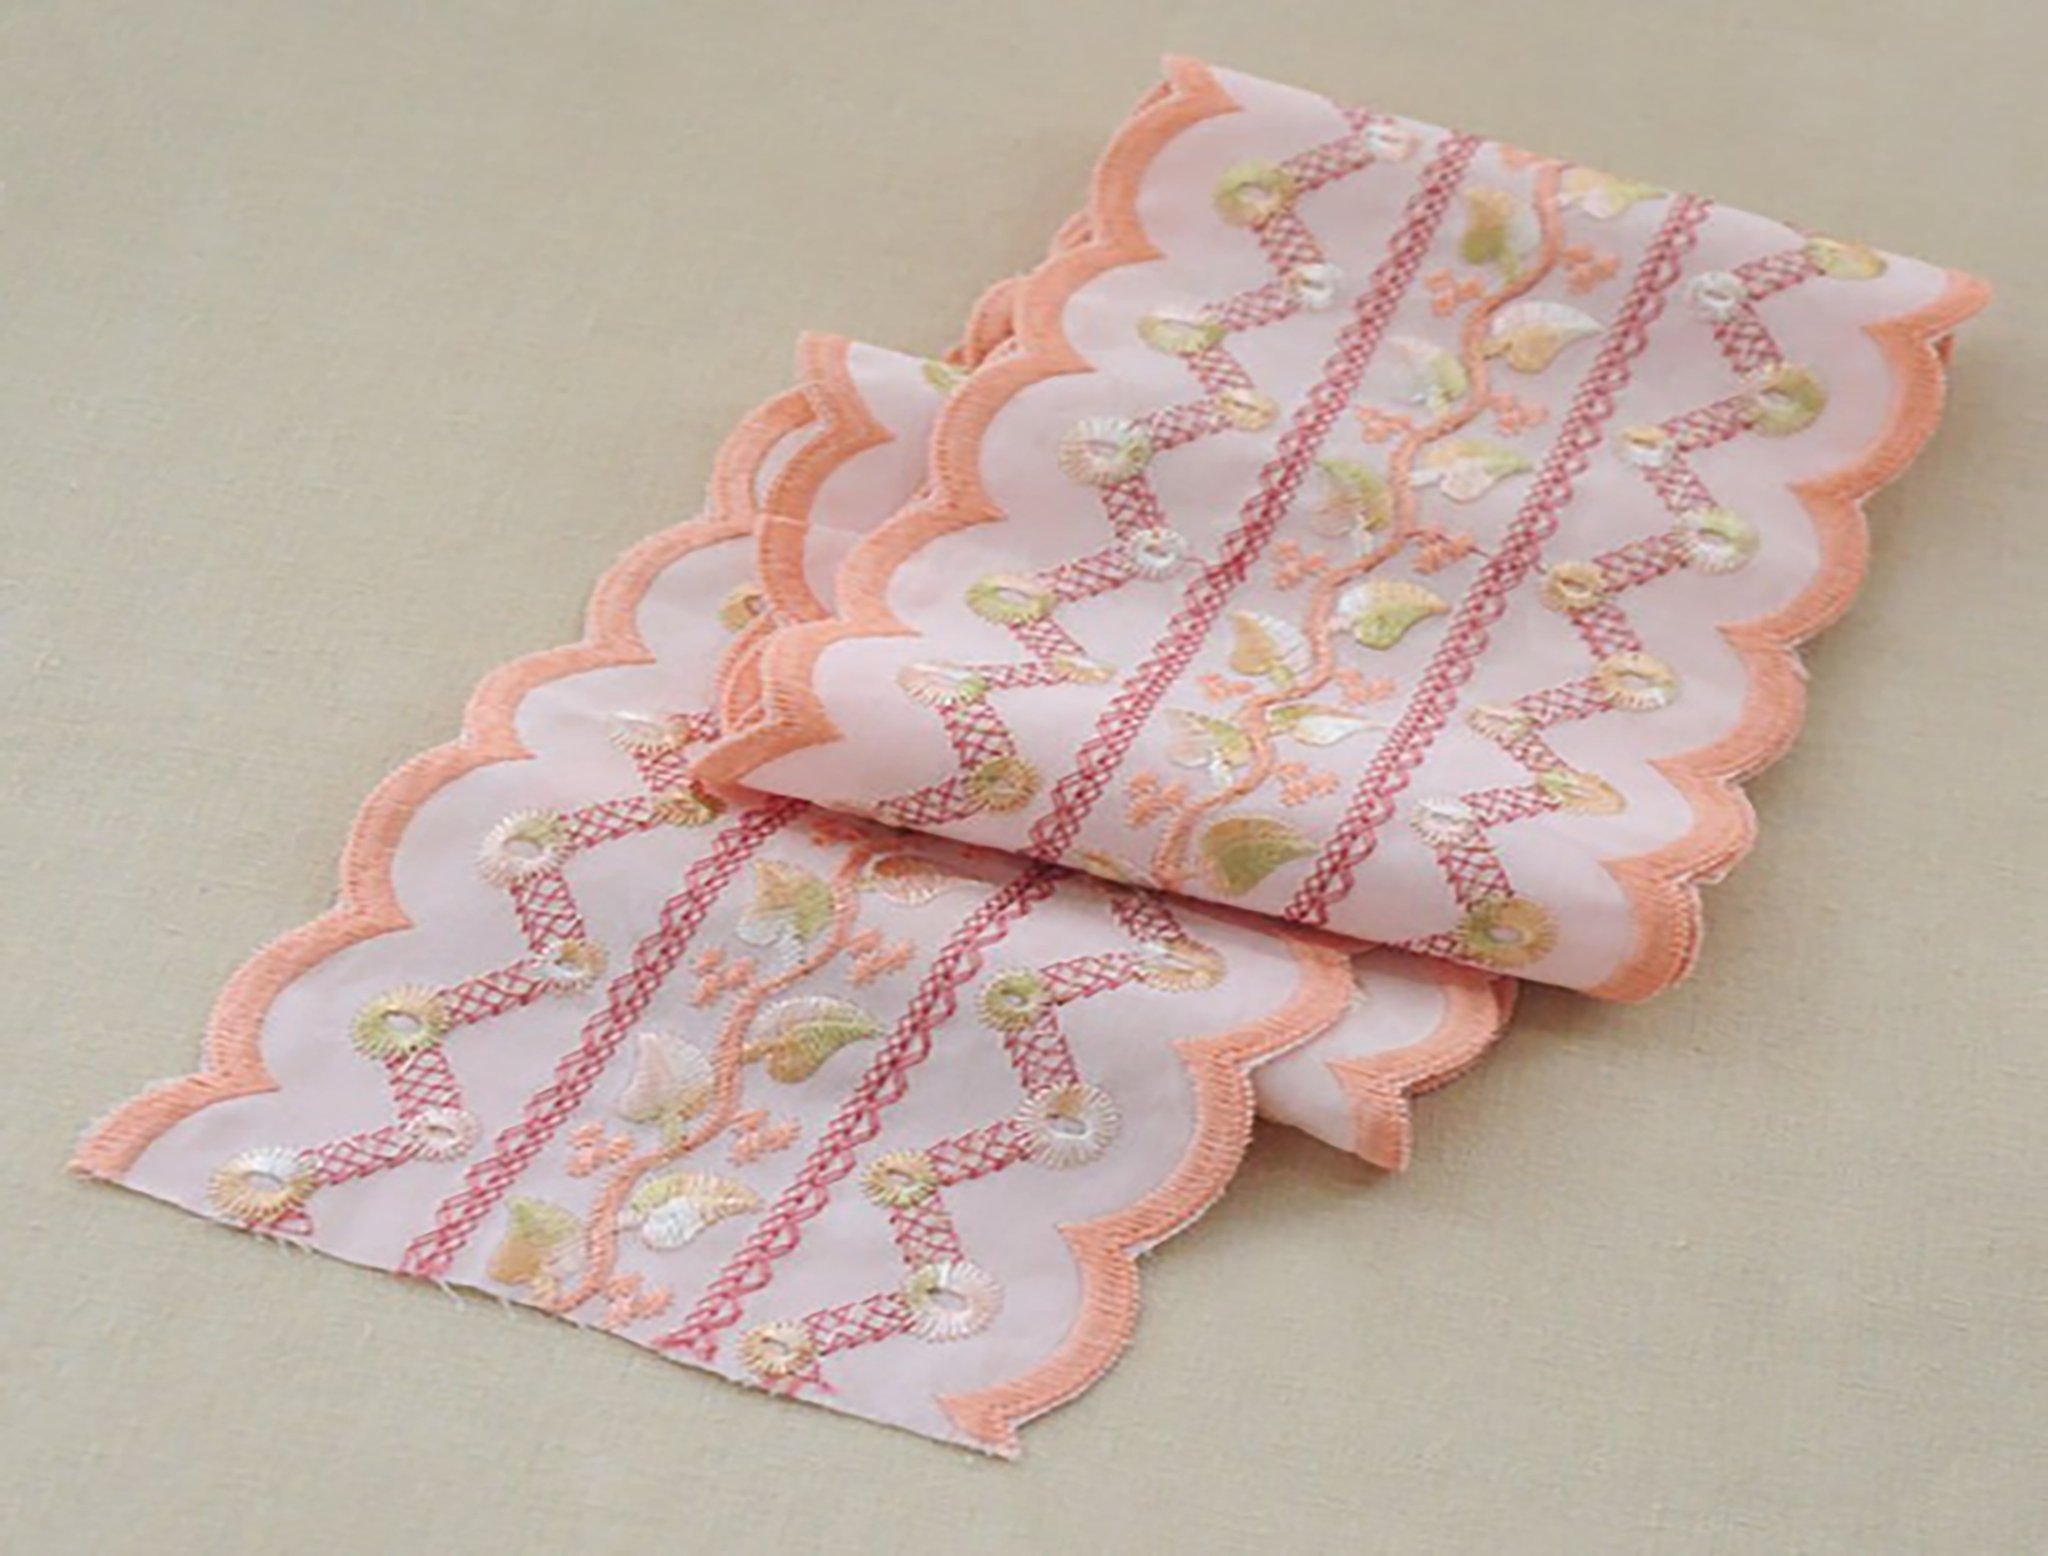 Shades of Hombre Peach/Green/Pink Shinny Embroidery on Pink Background- Double Border - Cotton  Lace- 11.5 cm Wide.